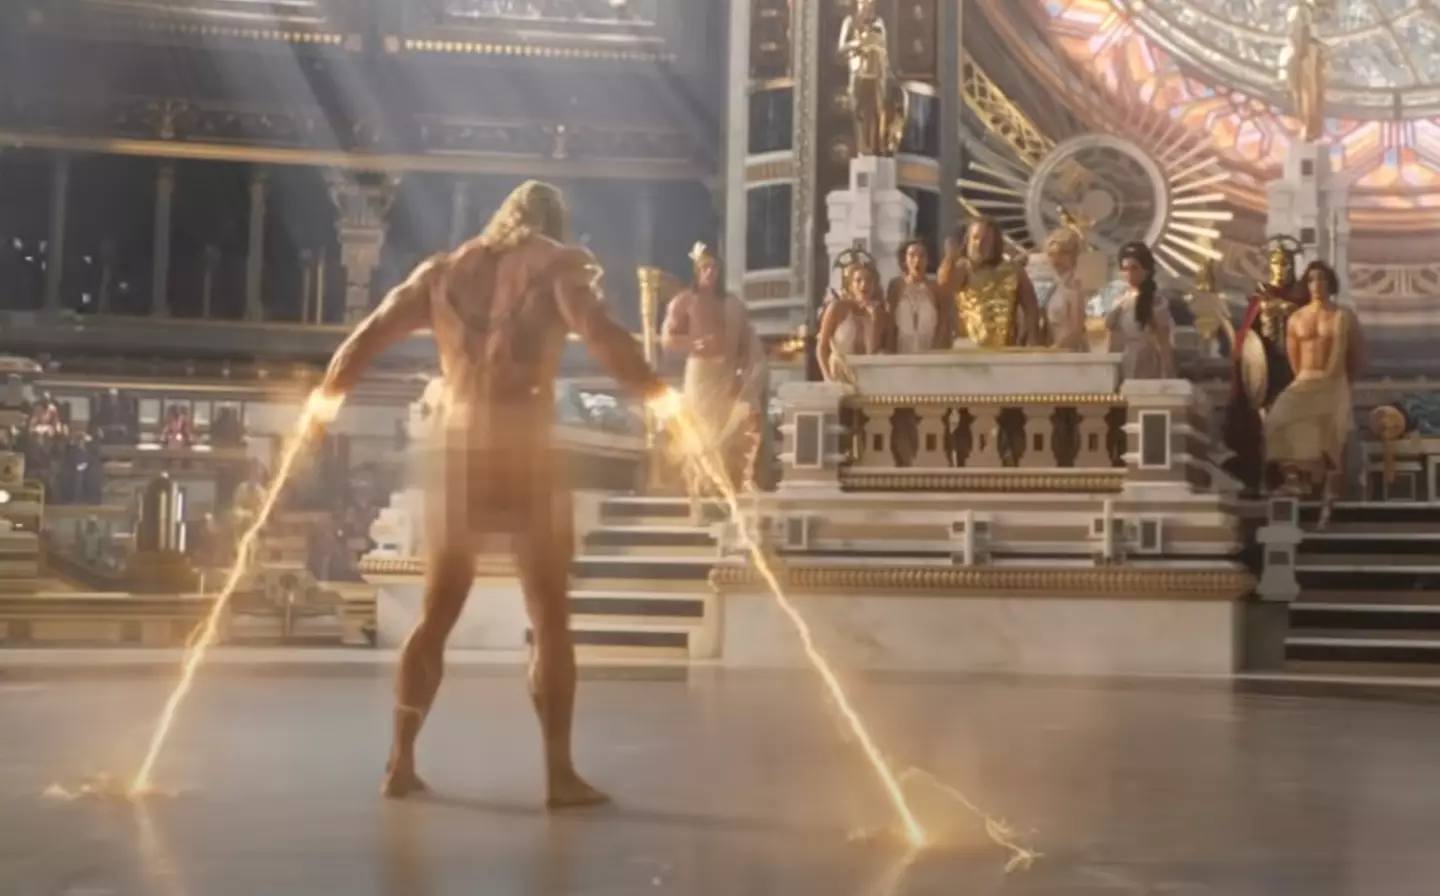 Thor's confrontation with Zeus doesn't go too well.